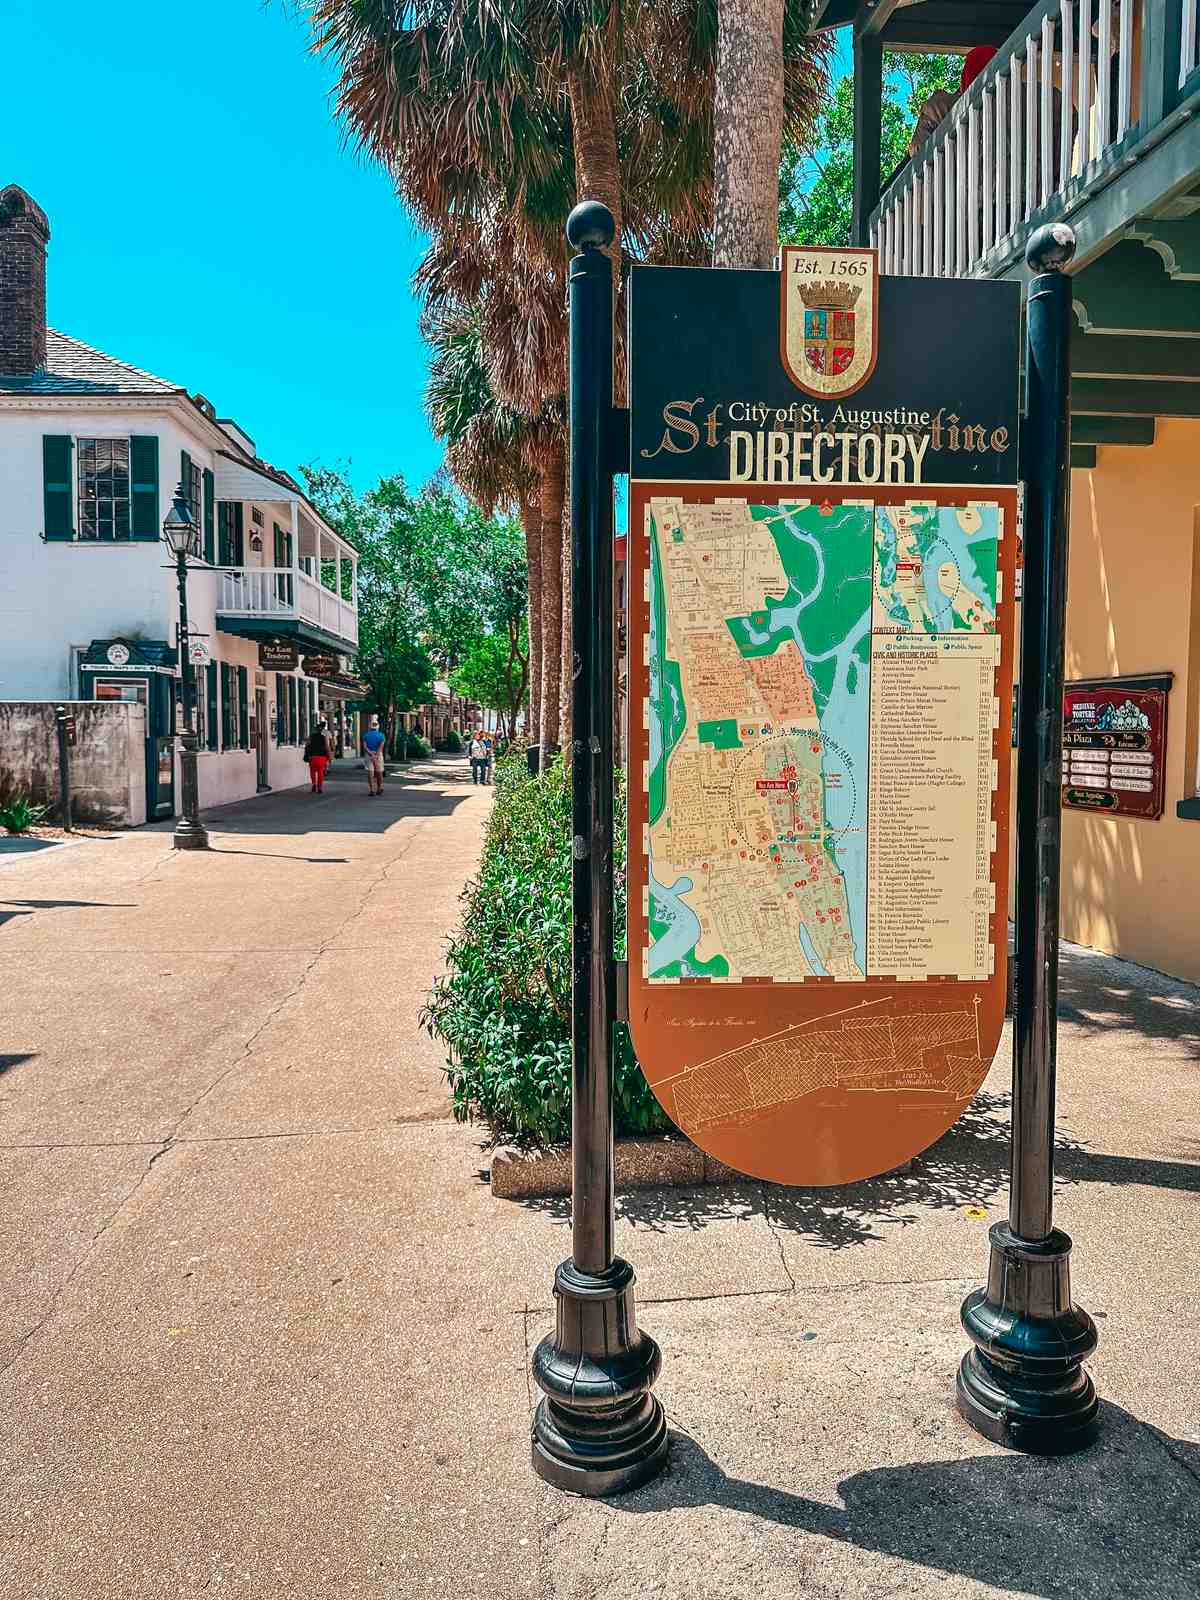 City of St. Augustine directory